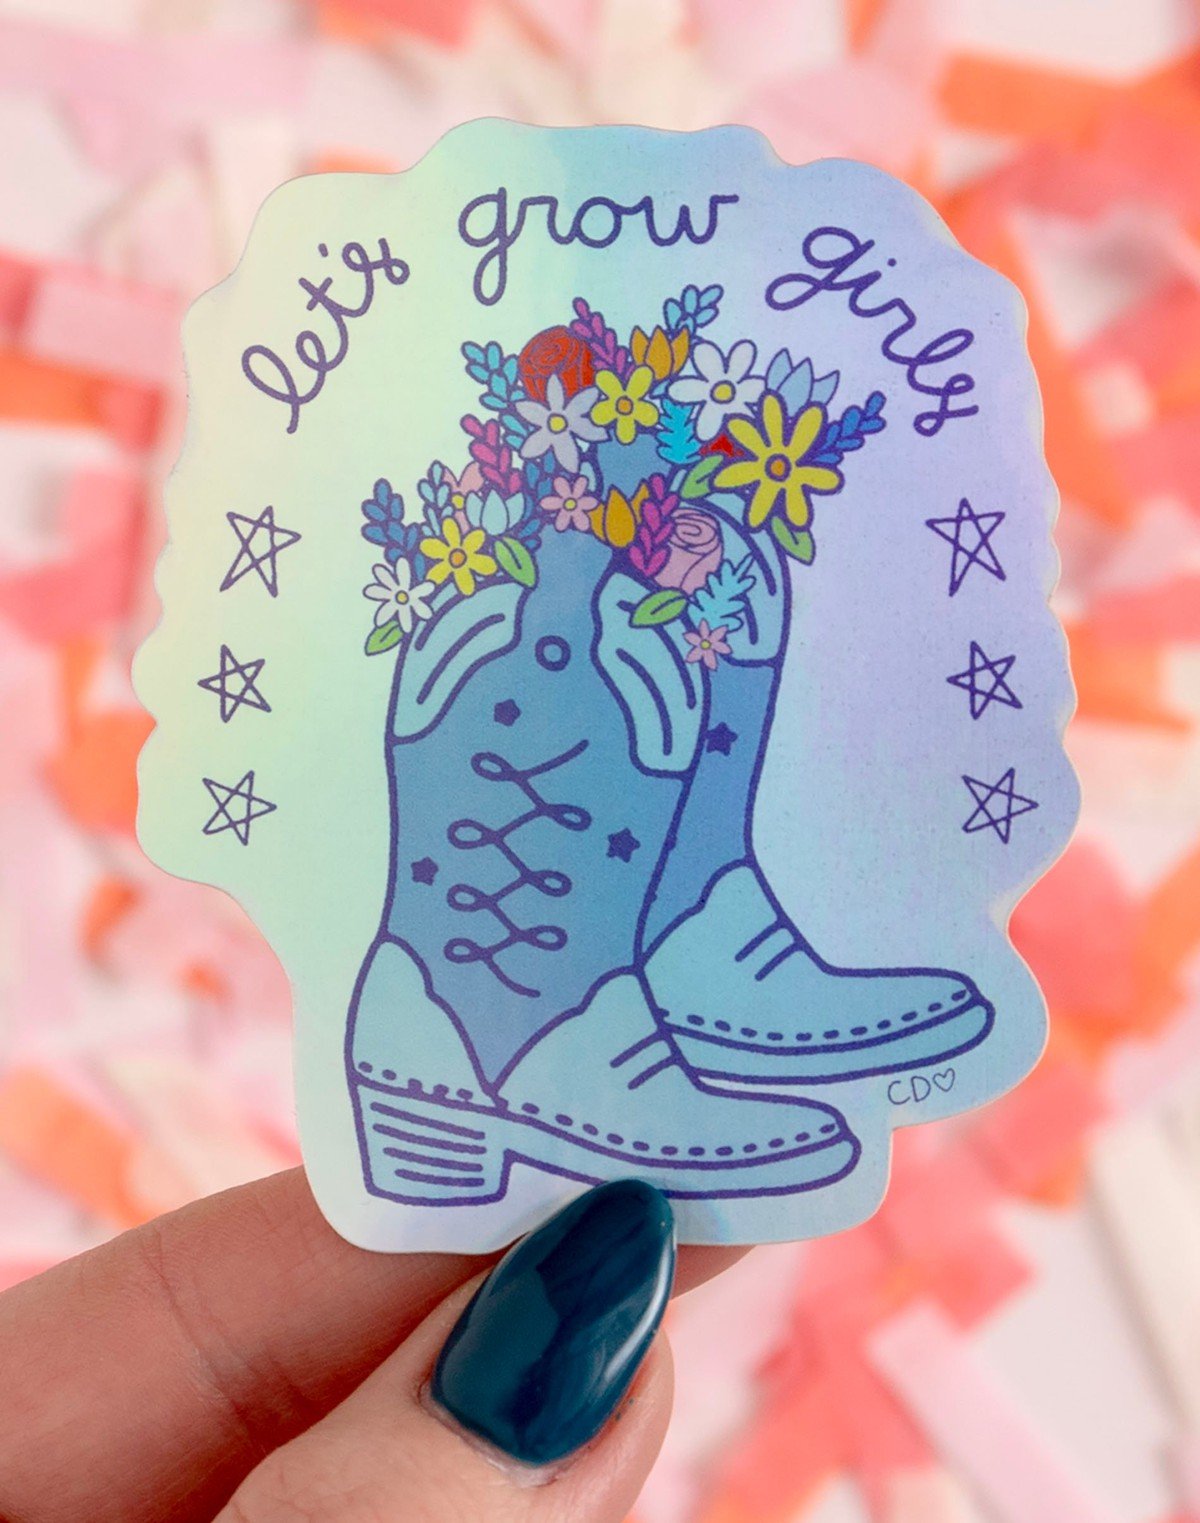 Let's Grow Girls Holographic Decal Sticker item